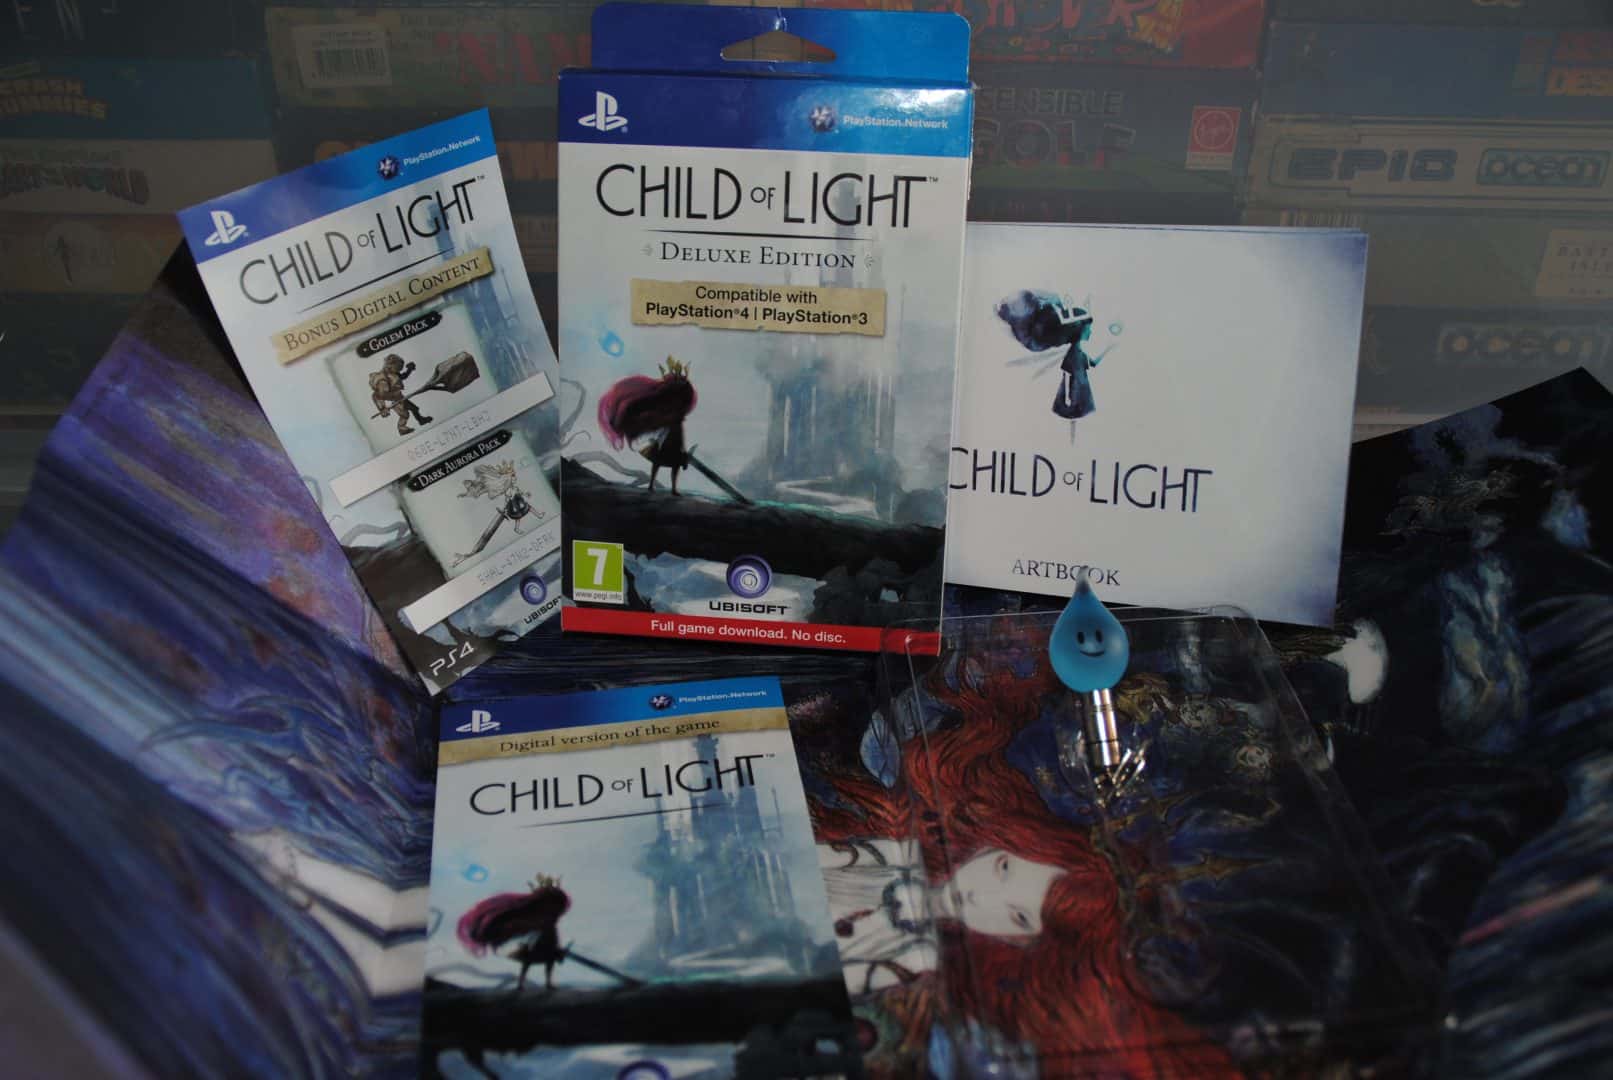 All the stuff inside the retail box. no blu-ray disk was included sadly.